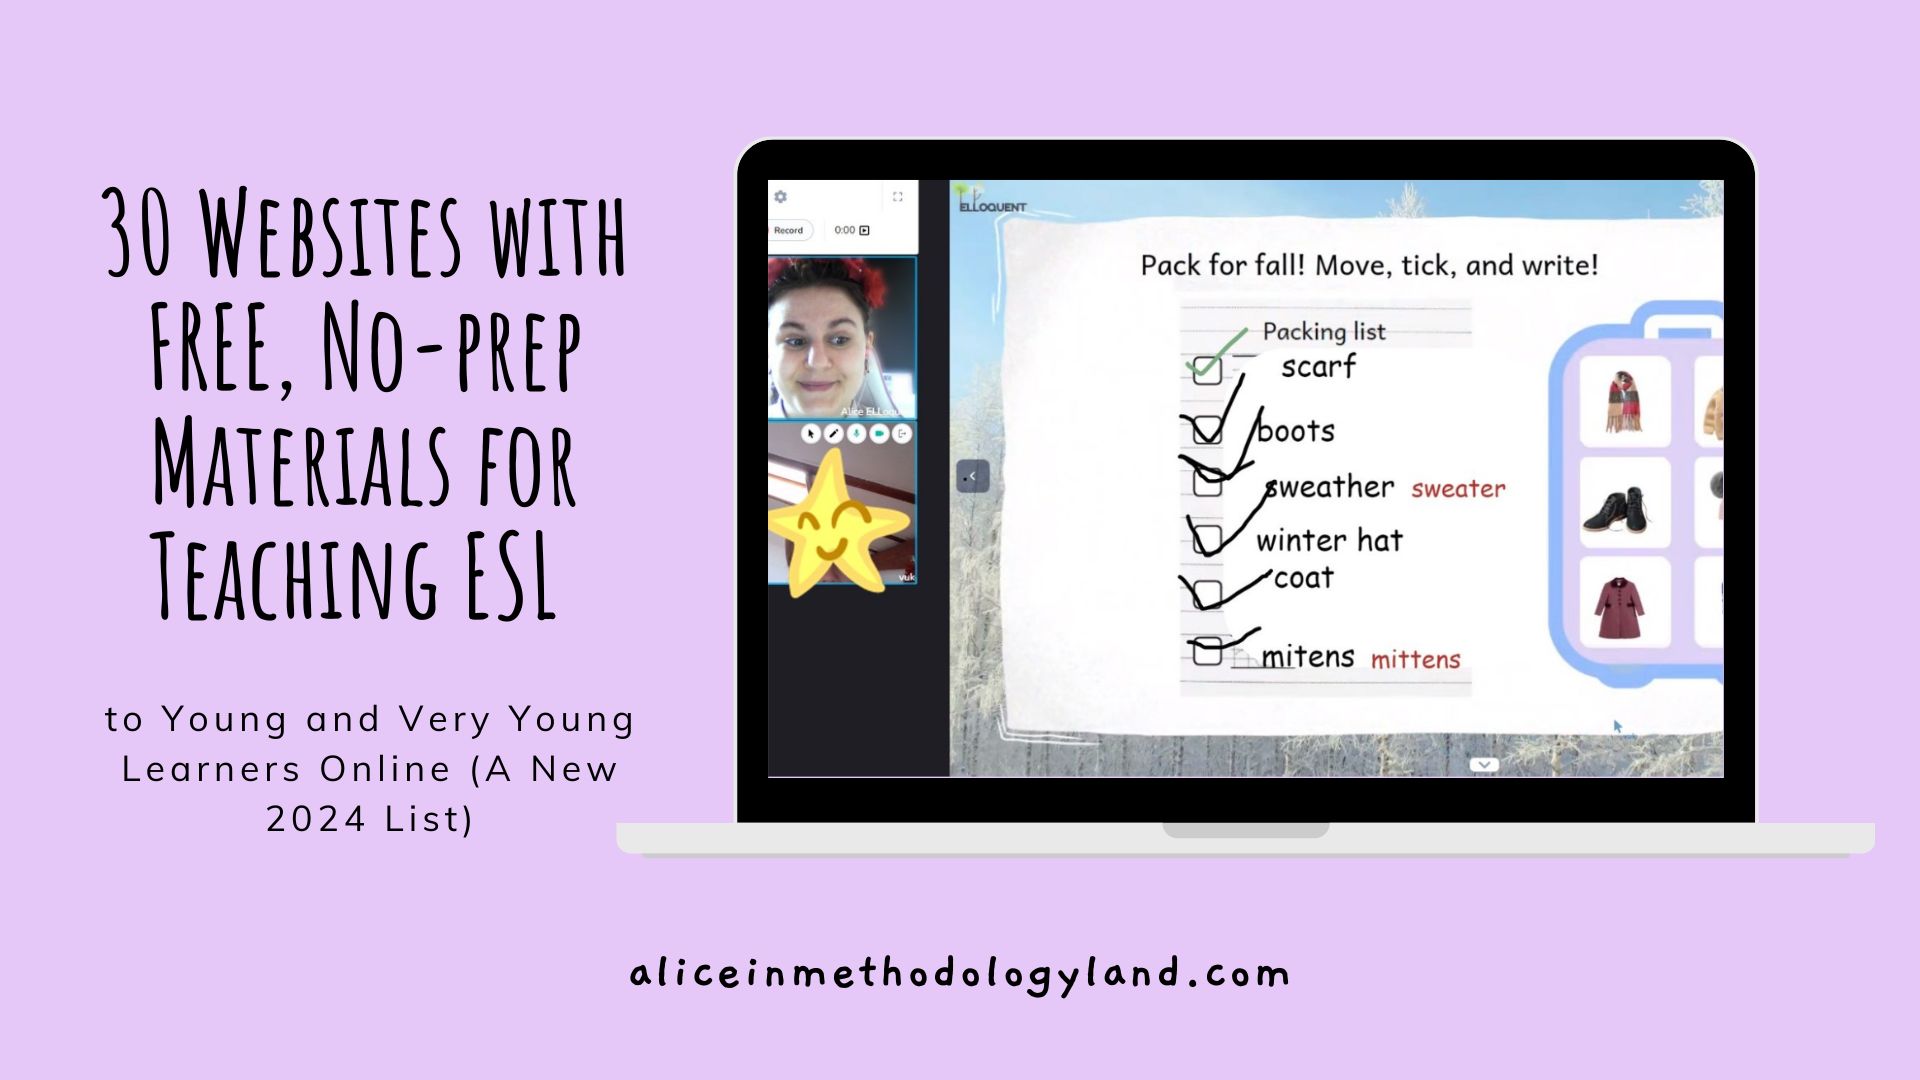 30 Websites with FREE, No-prep Materials for Teaching ESL to Young and Very Young Learners Online (A New 2024 List)